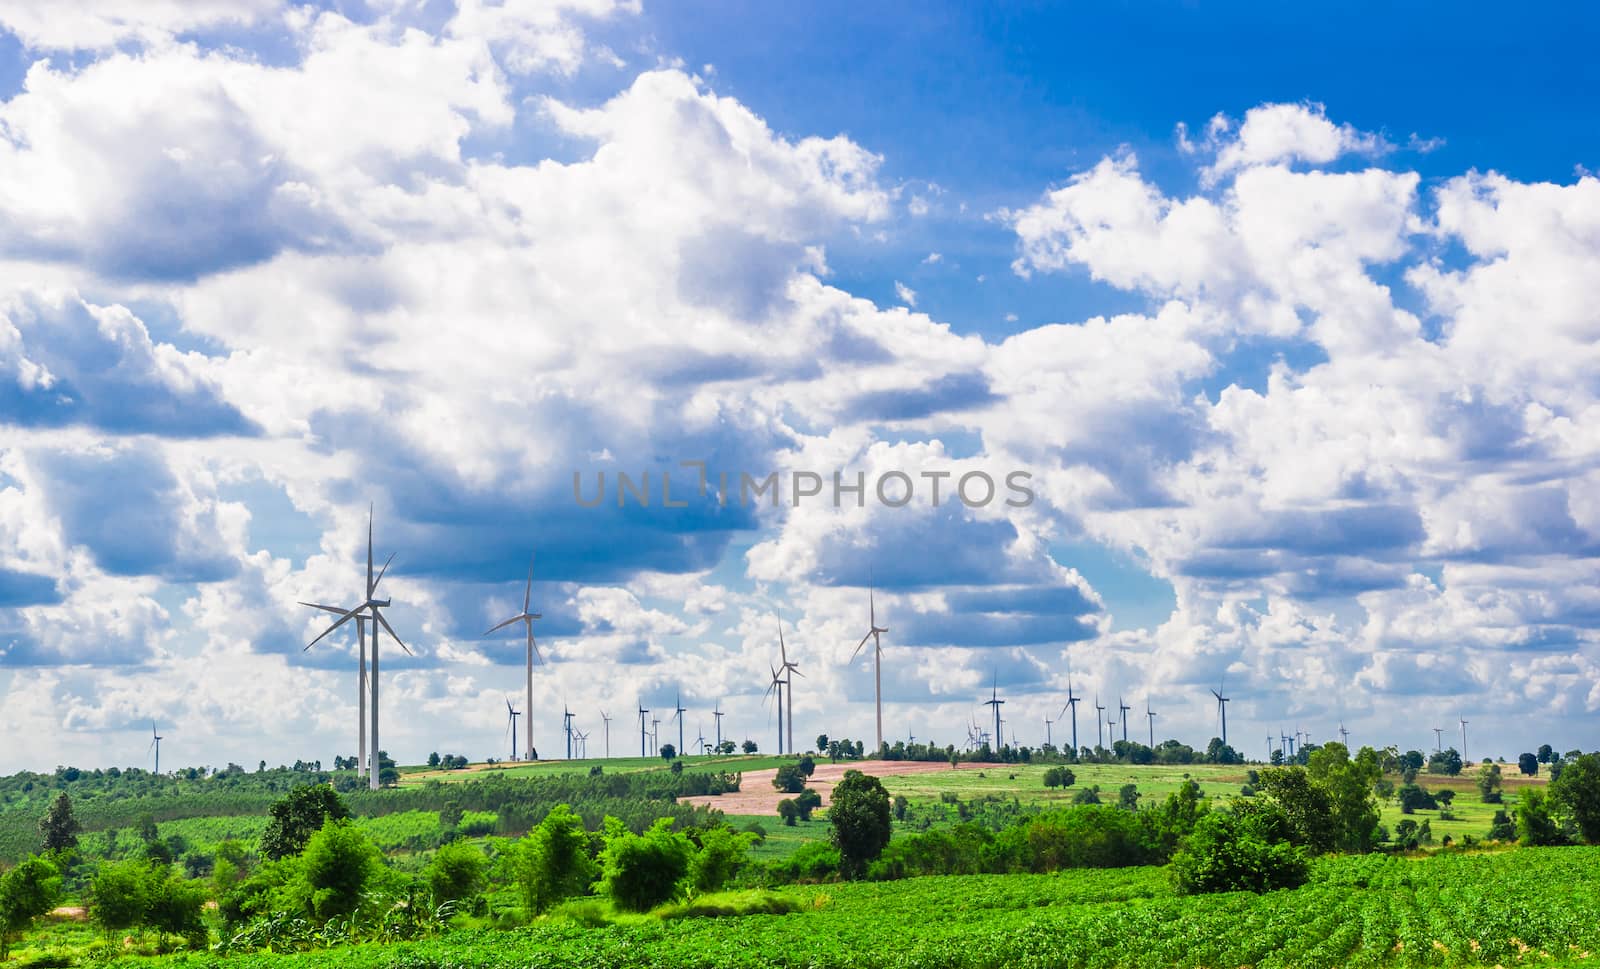 windmills for electric power production